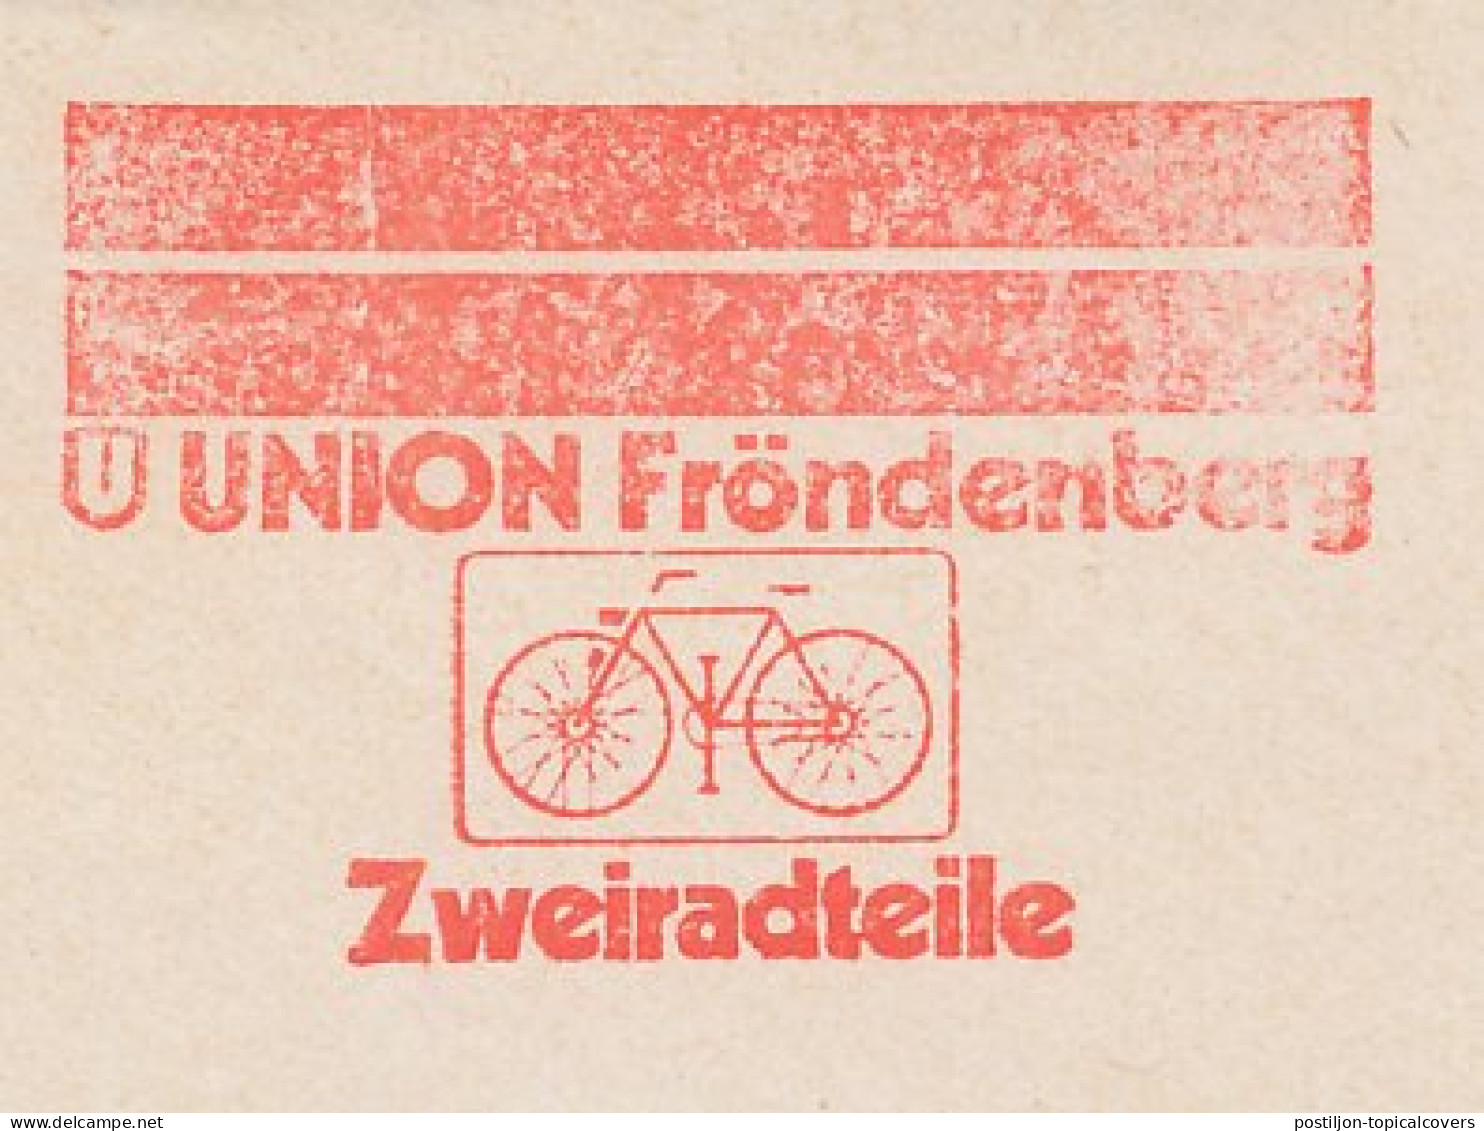 Meter Cut Germany 1980 Union - Bicycle - Wielrennen